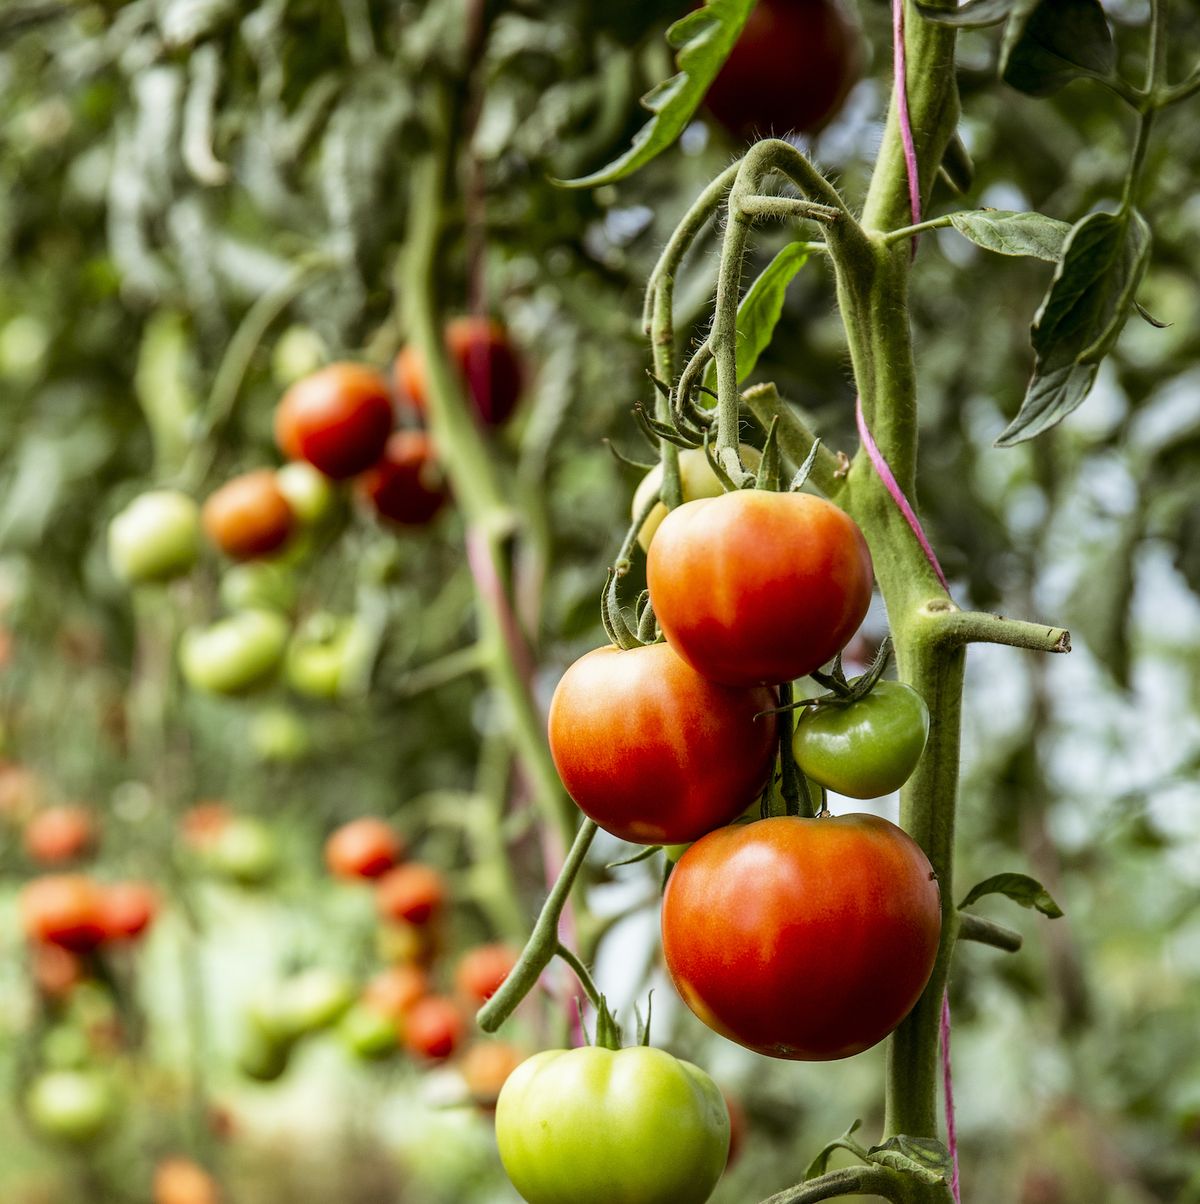 Top 5 Tips for Growing Tomatoes Indoors (From a Tomato Expert)